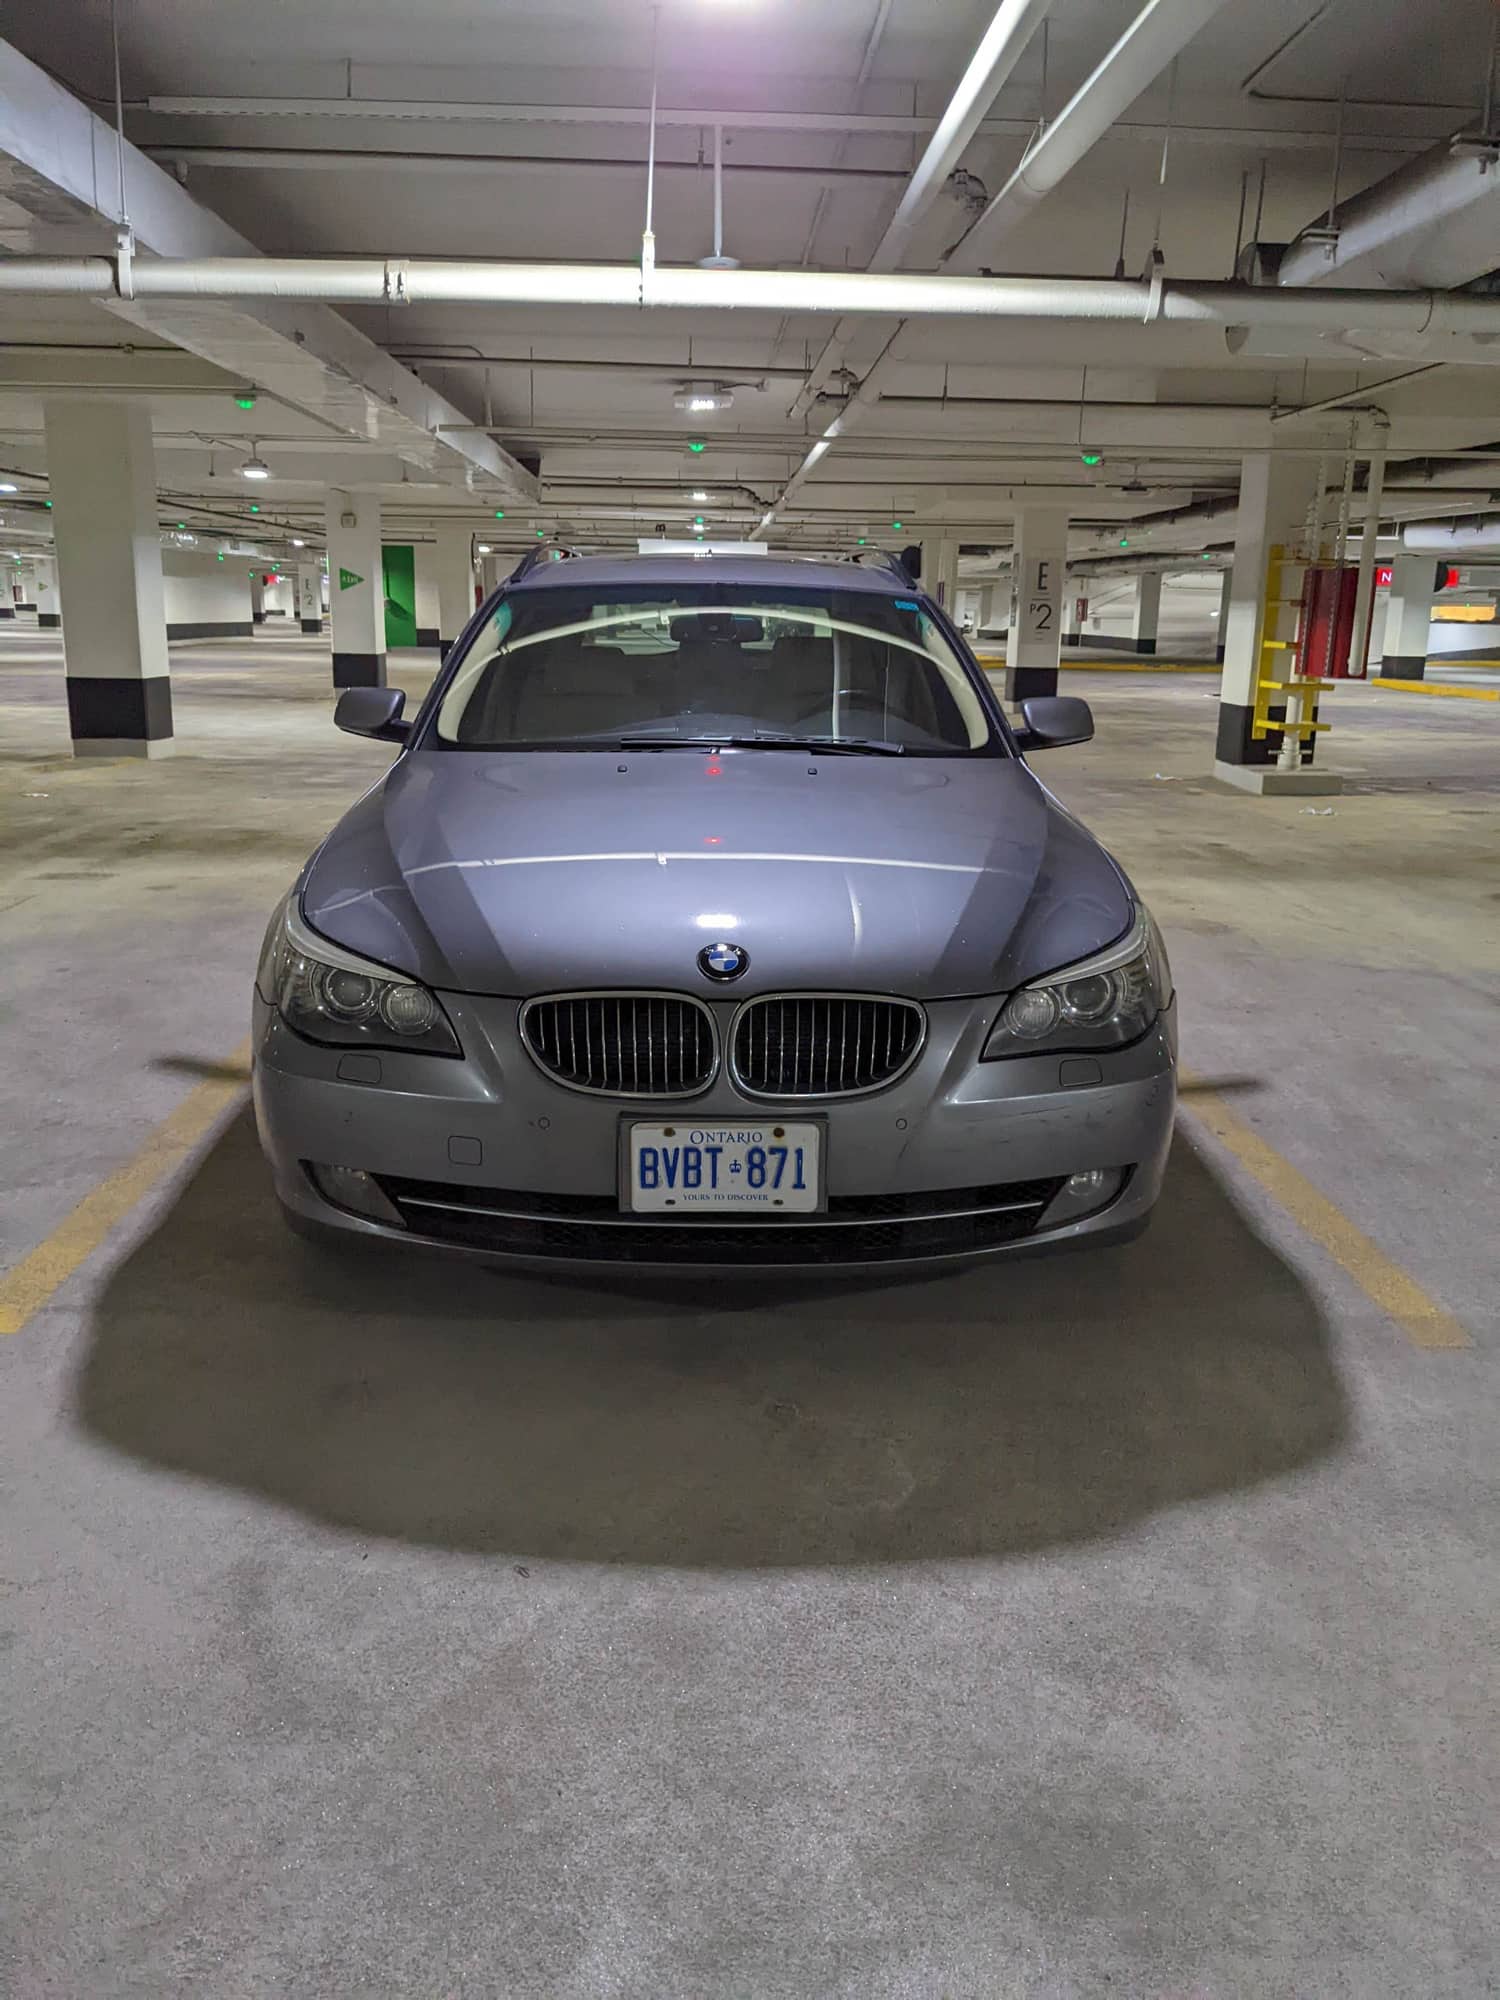 08 E61 Touring- modifications and intro. -  - Forums